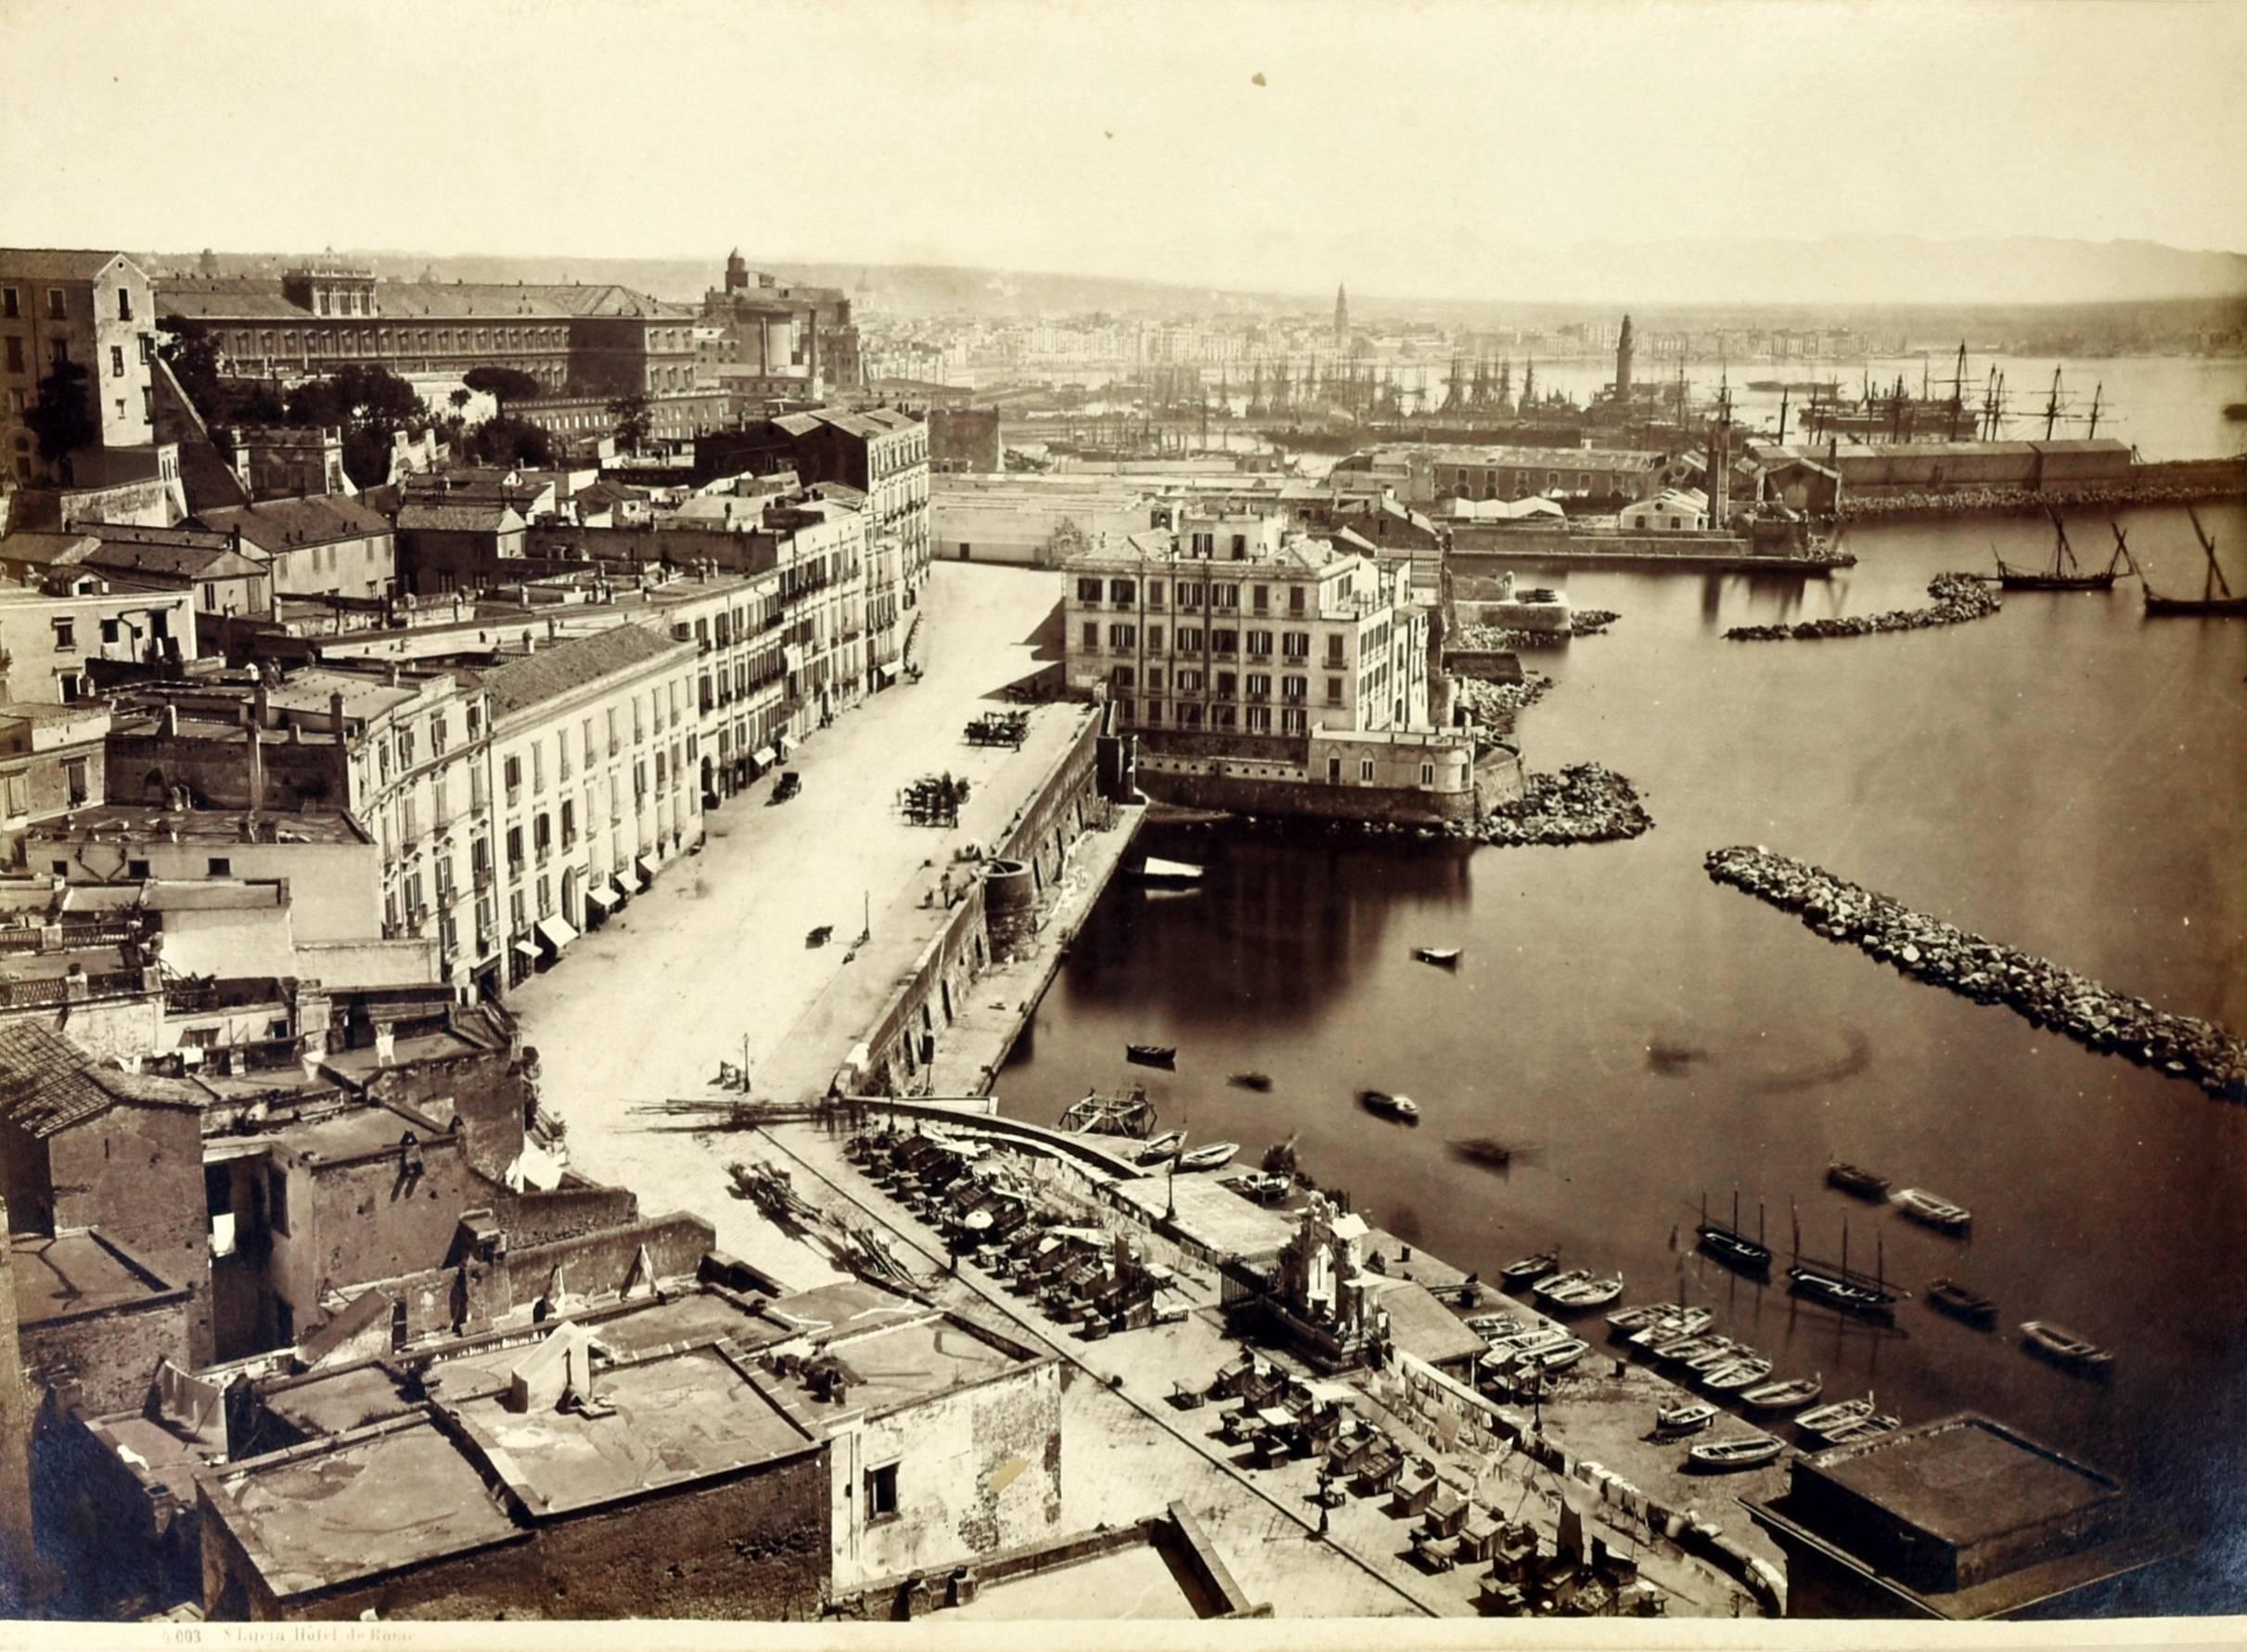 Twelve large Grand Tour albumen prints, apparently by Giorgio Sommer, likely from the 1860's. Sommer was an important 19th c. photographer who moved his studio to Naples in 1856, and photographed all the principal tourist sites in and around Naples,